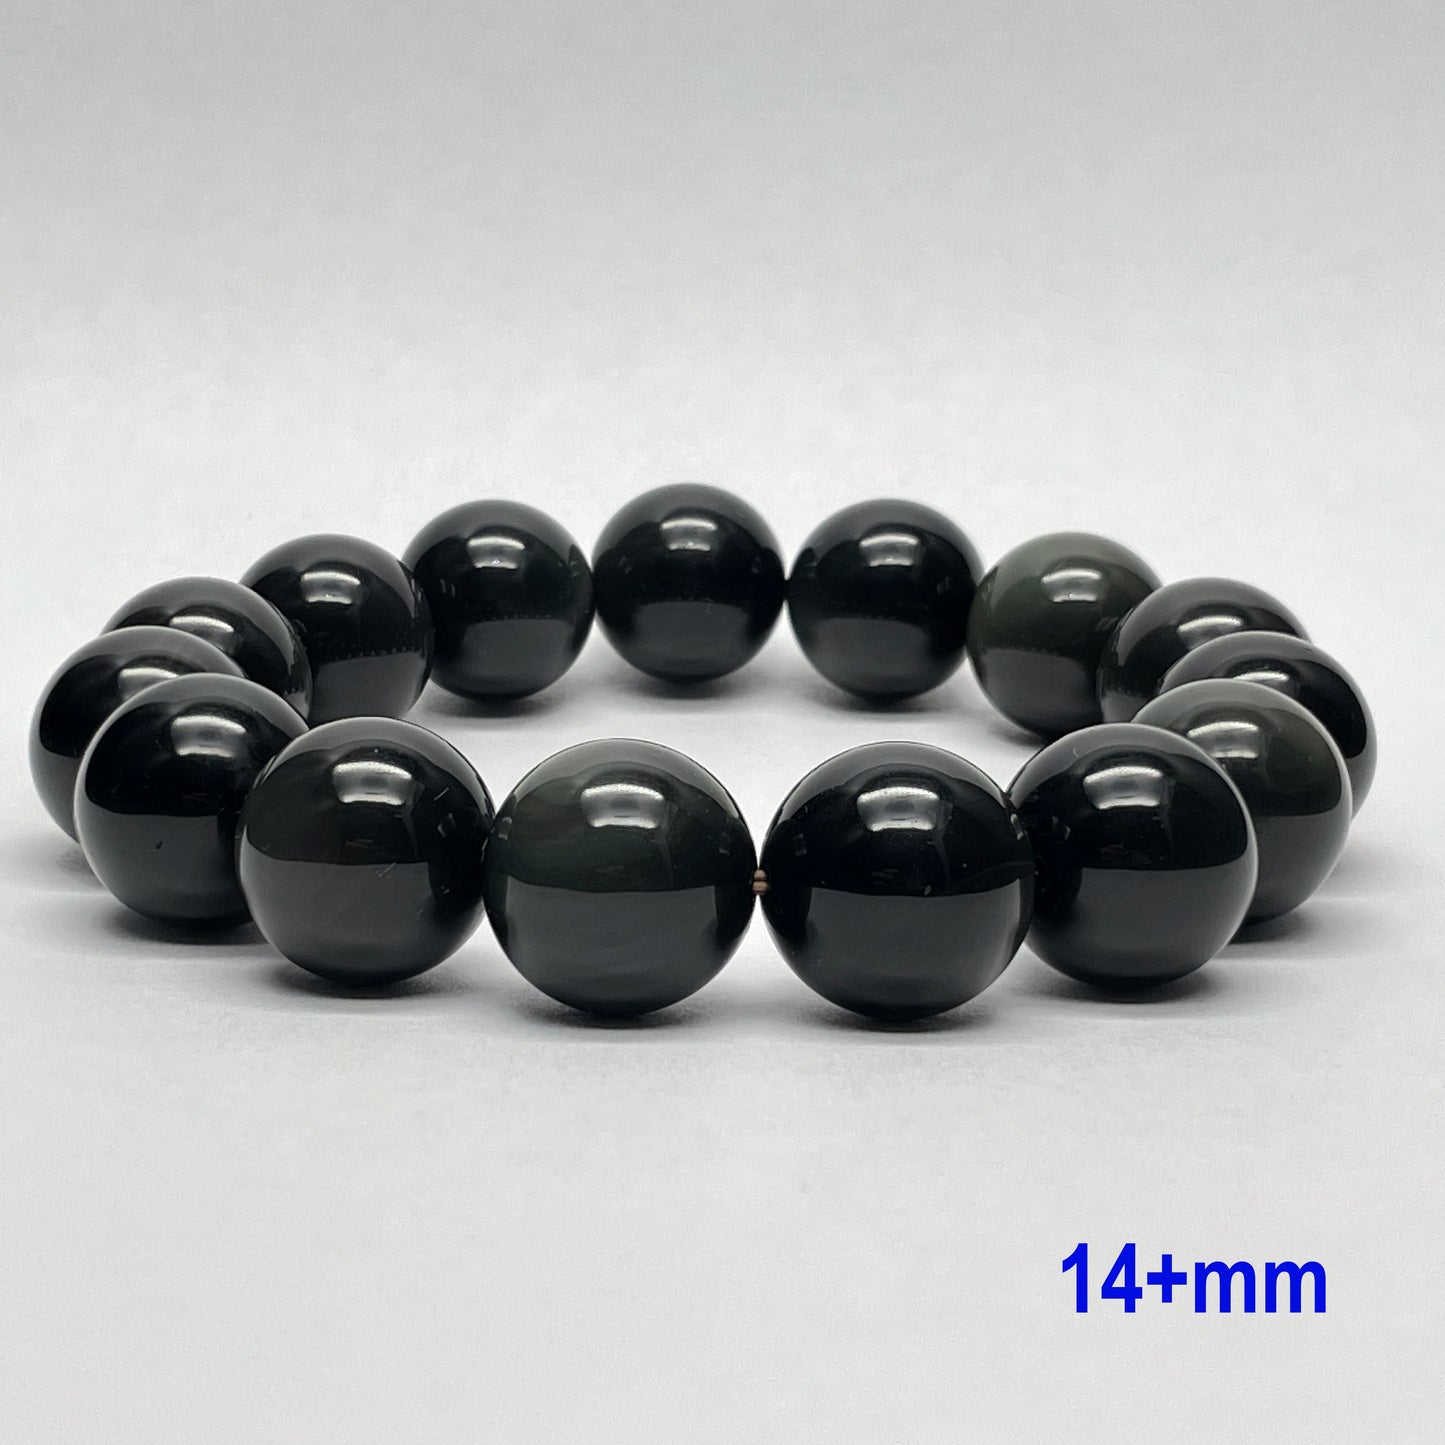 Stonelry Natural Rainbow Obsidian Beaded Bracelet (10 to 14+mm)